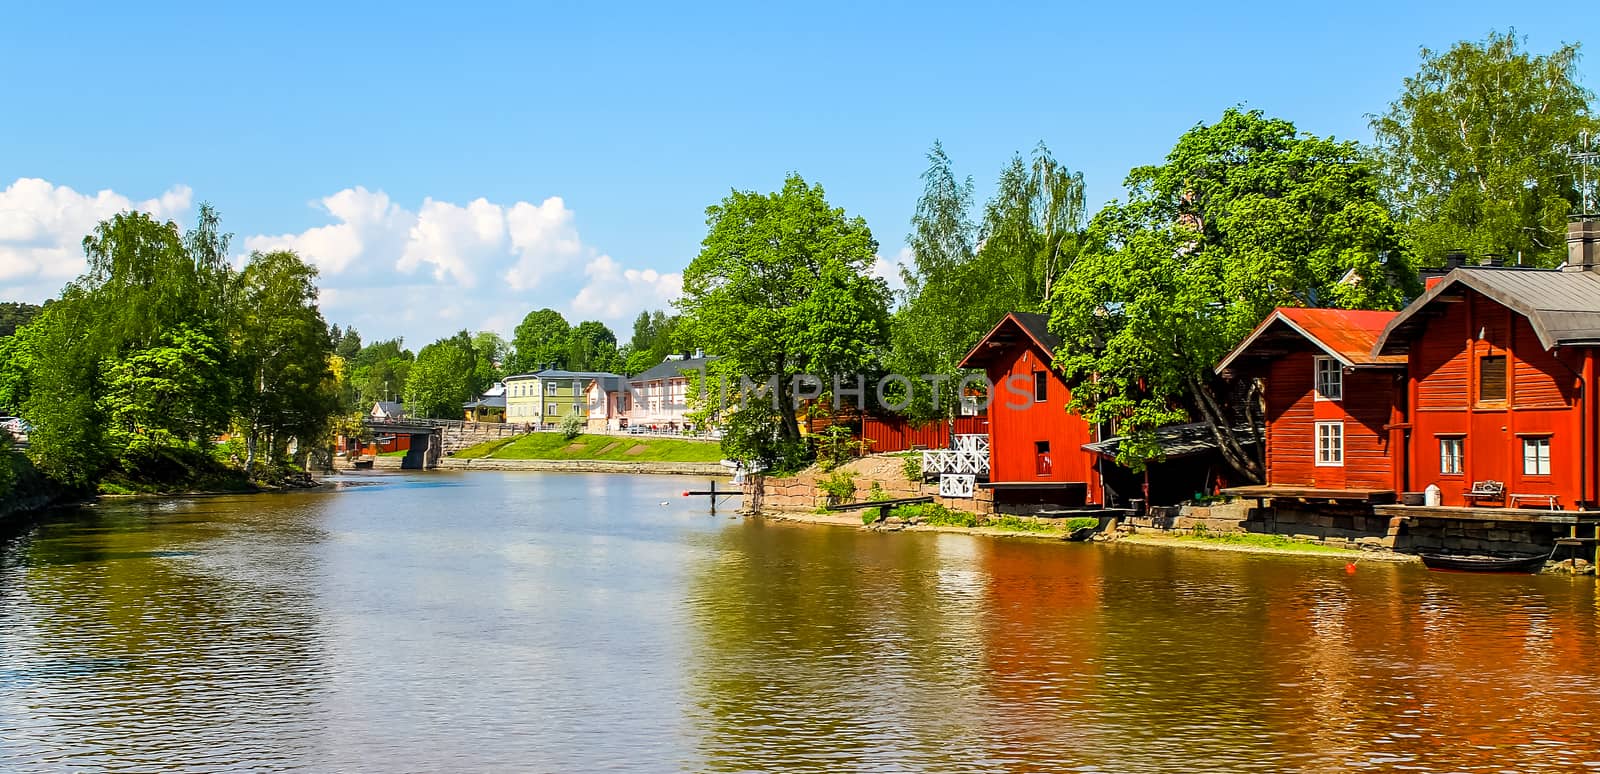 Old red warehouses alongside river Porvoo by Alexanderphoto